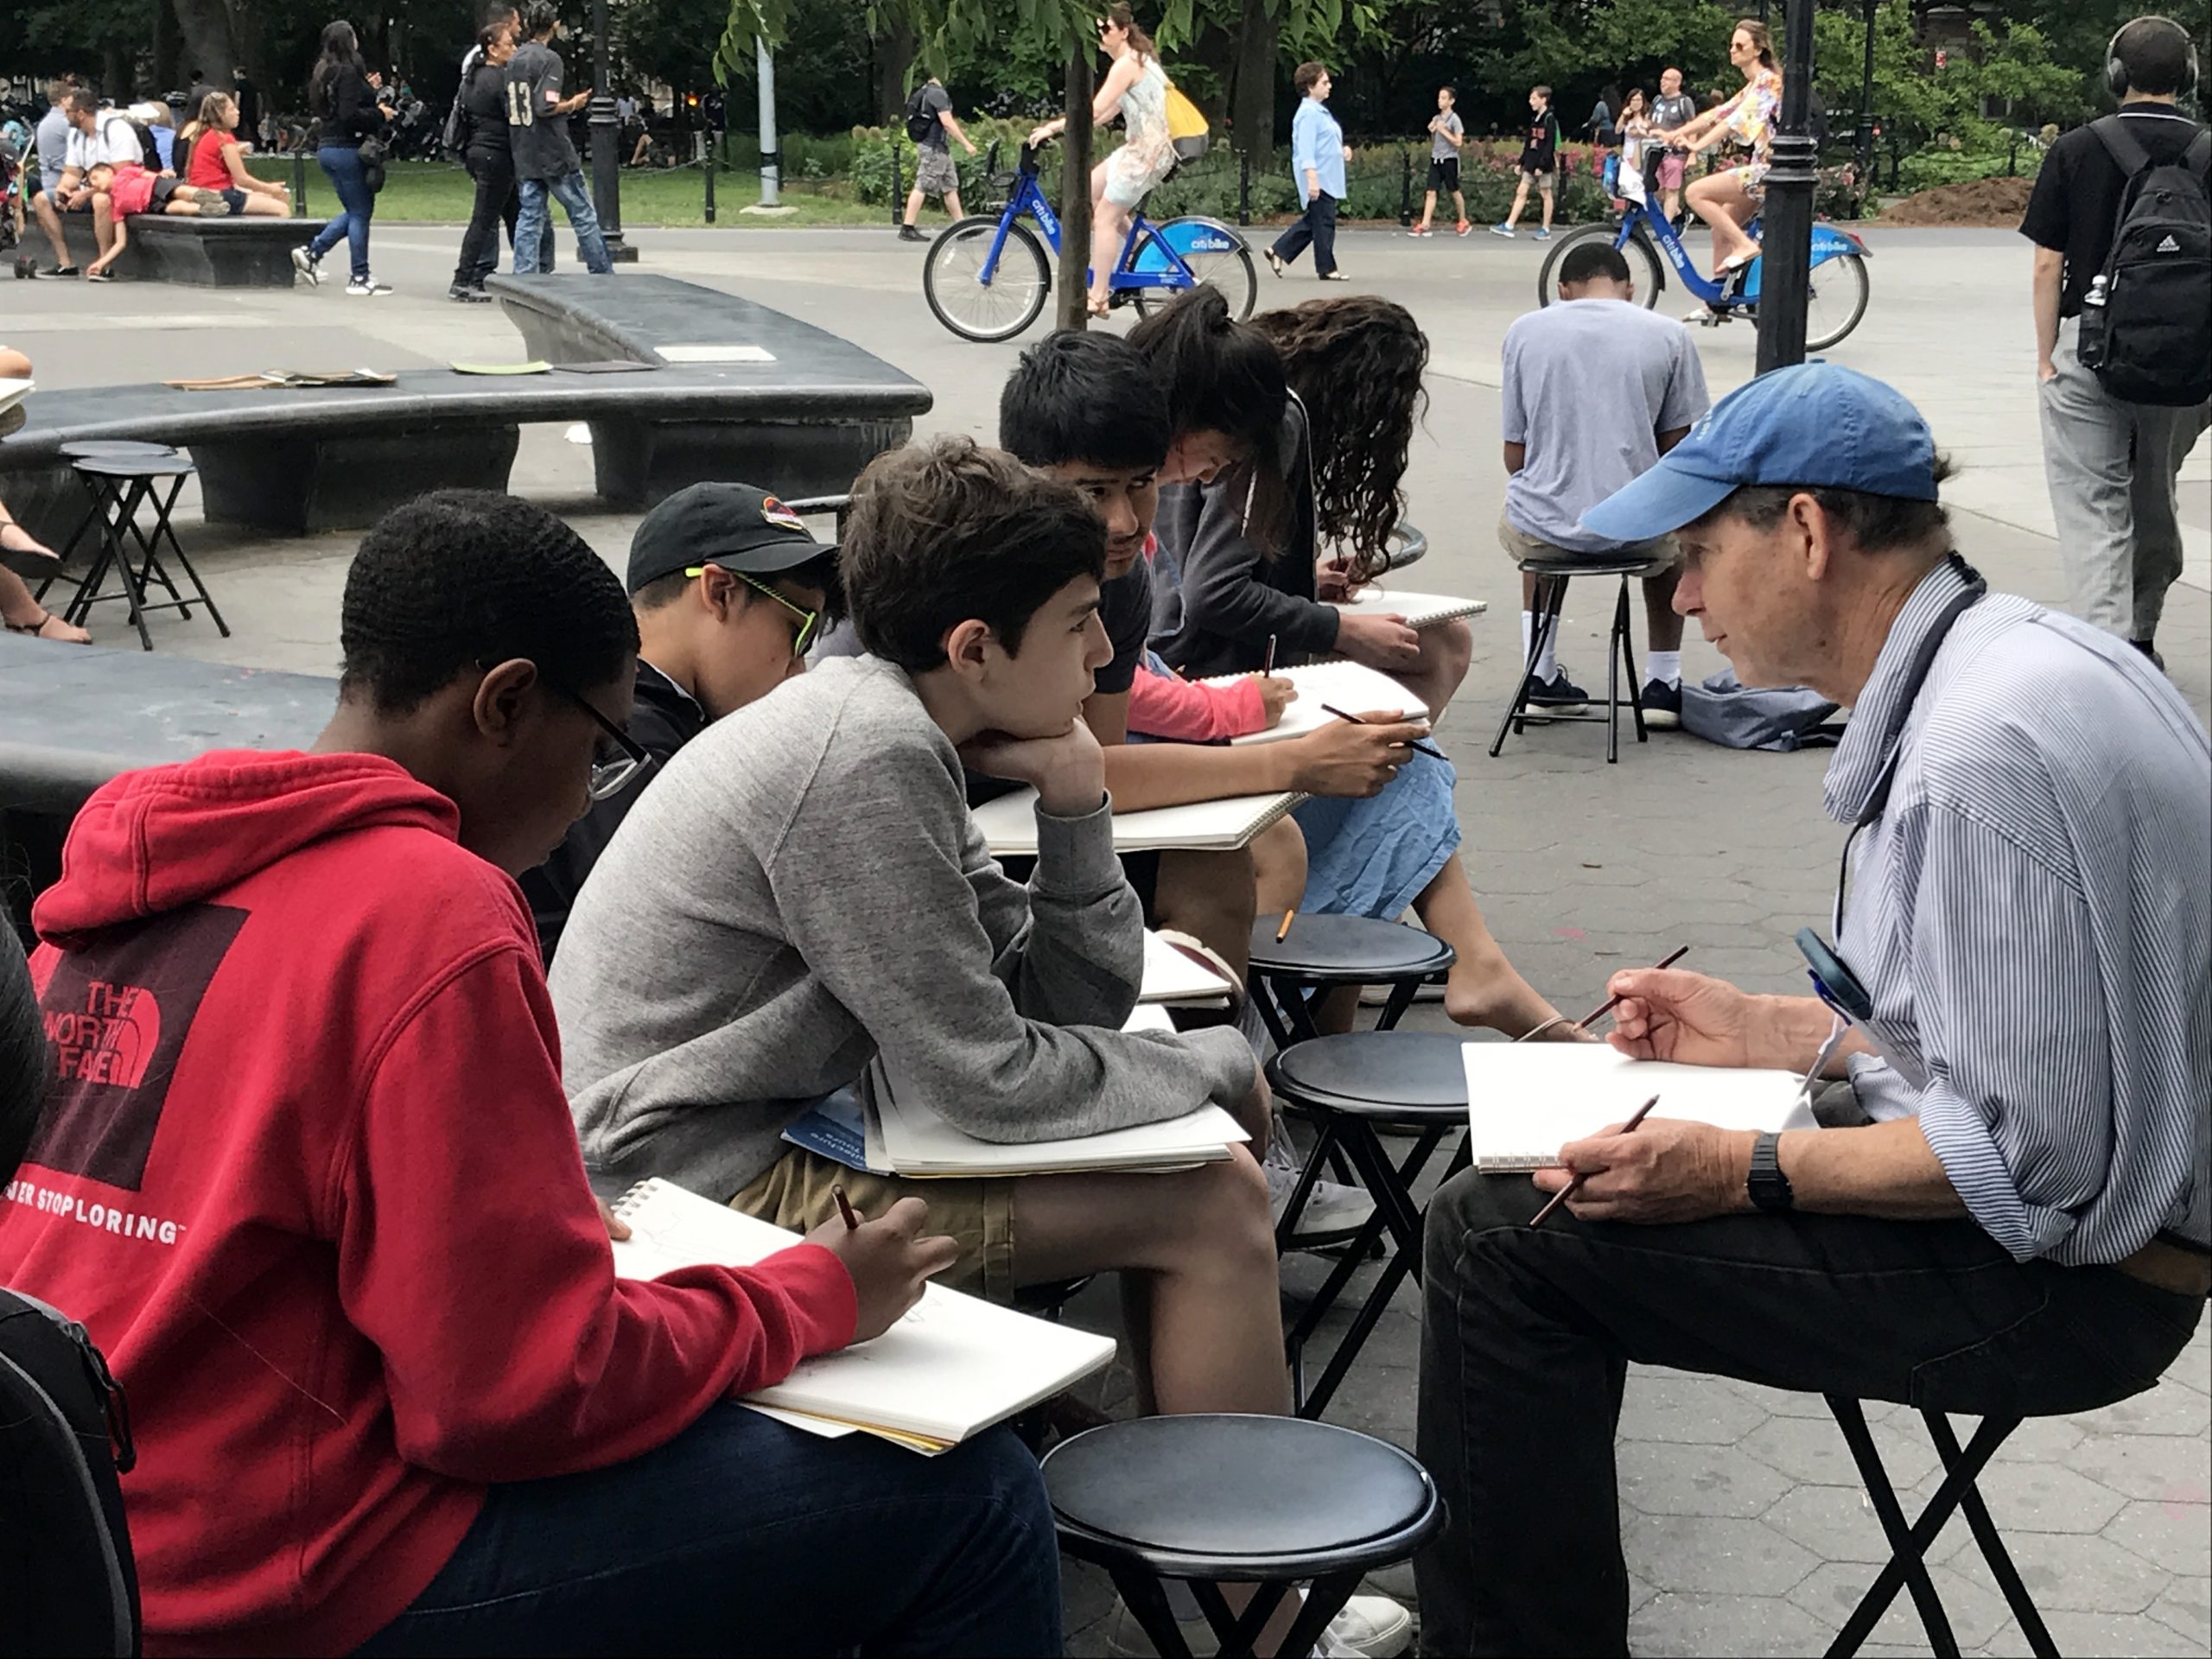 High school students and teacher sketching outside